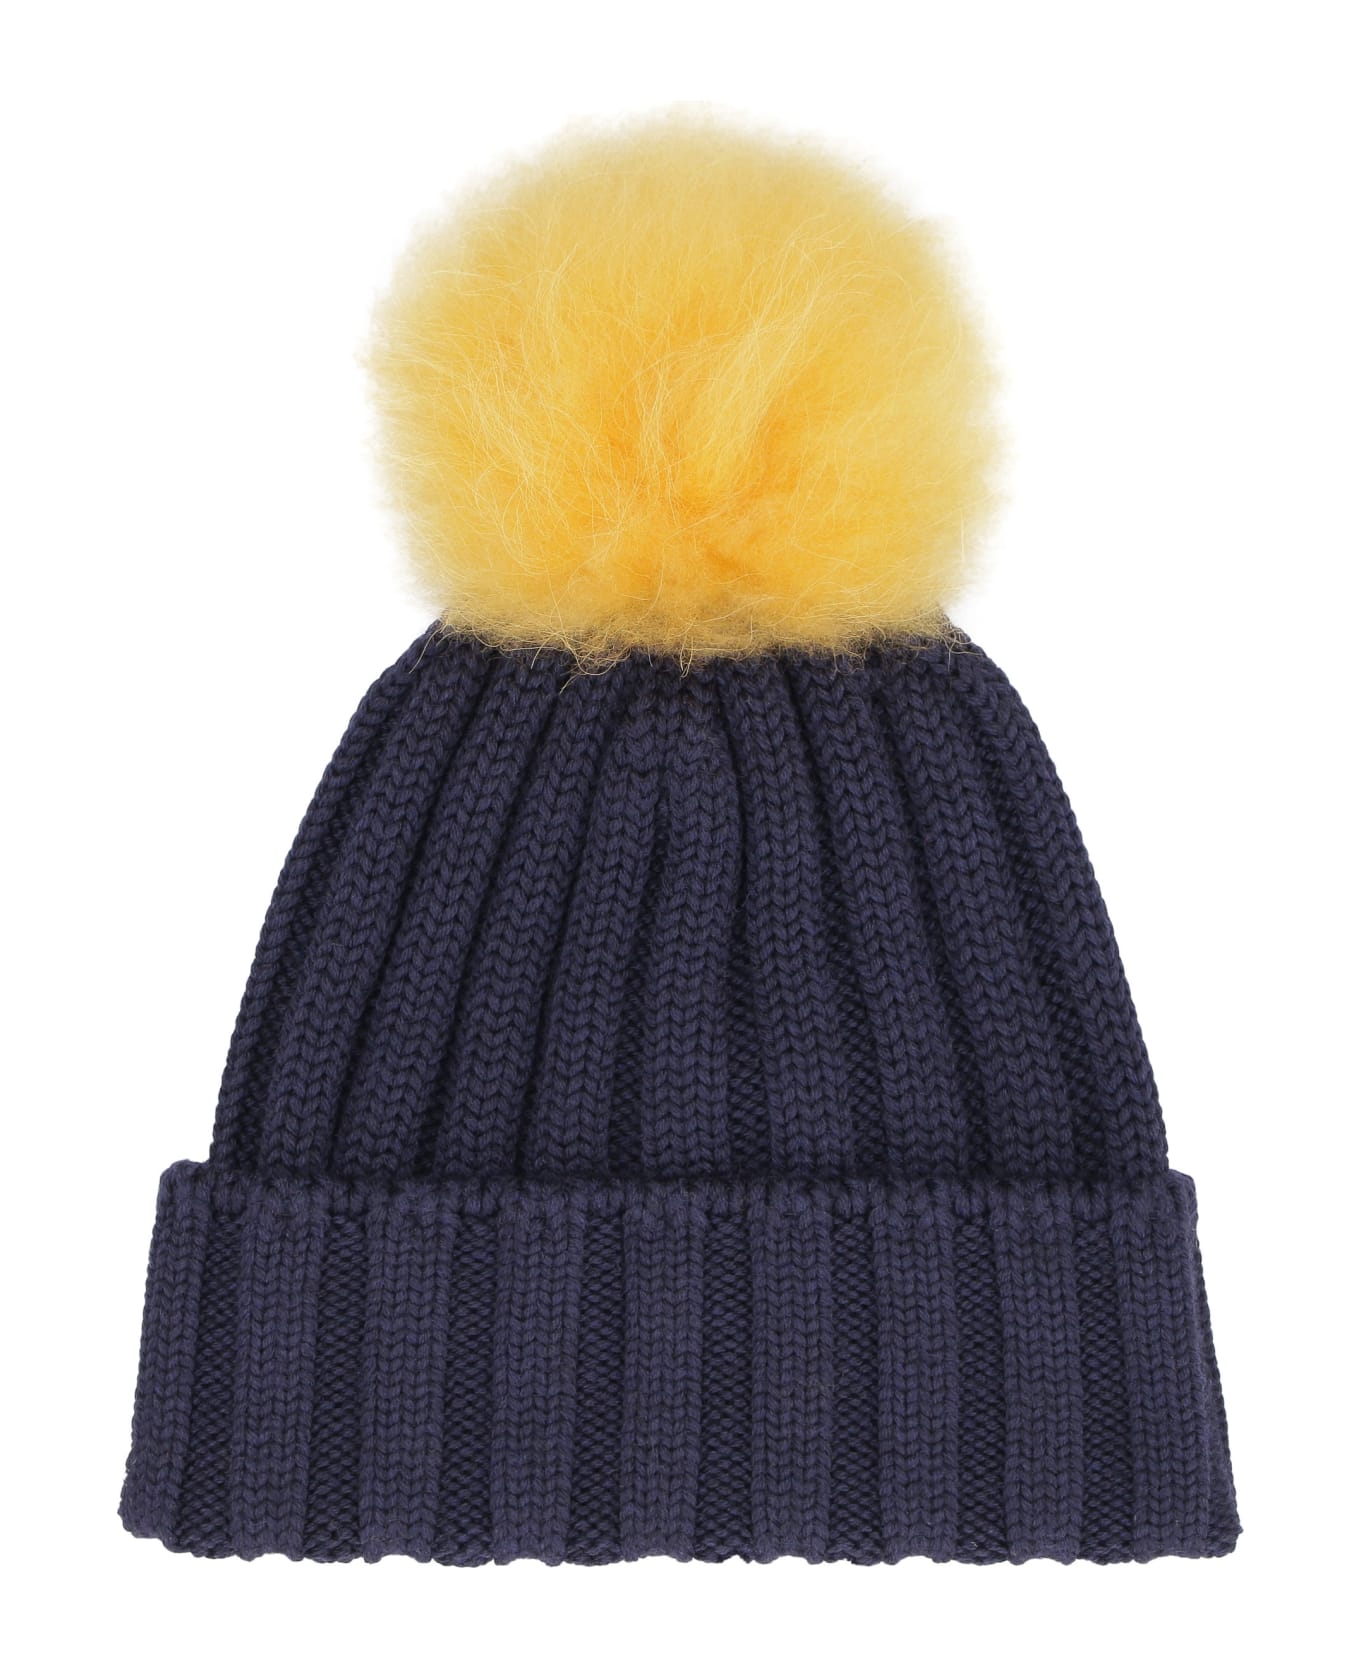 Woolrich Knitted Wool Hat With Pom-pom - blue